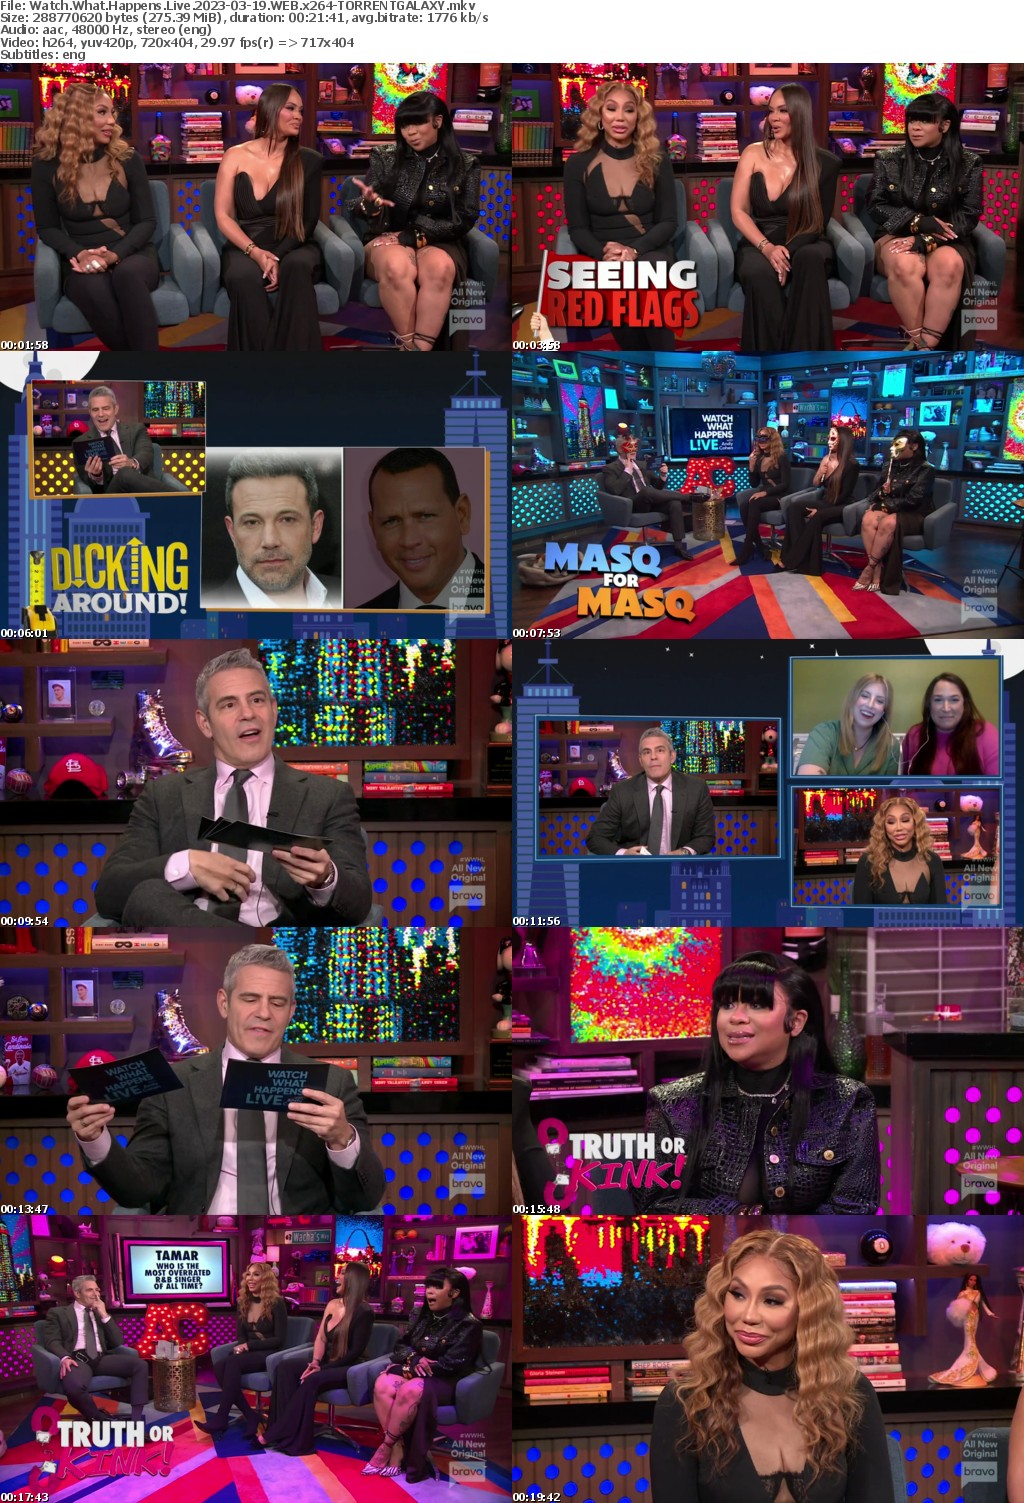 Watch What Happens Live 2023-03-19 WEB x264-GALAXY